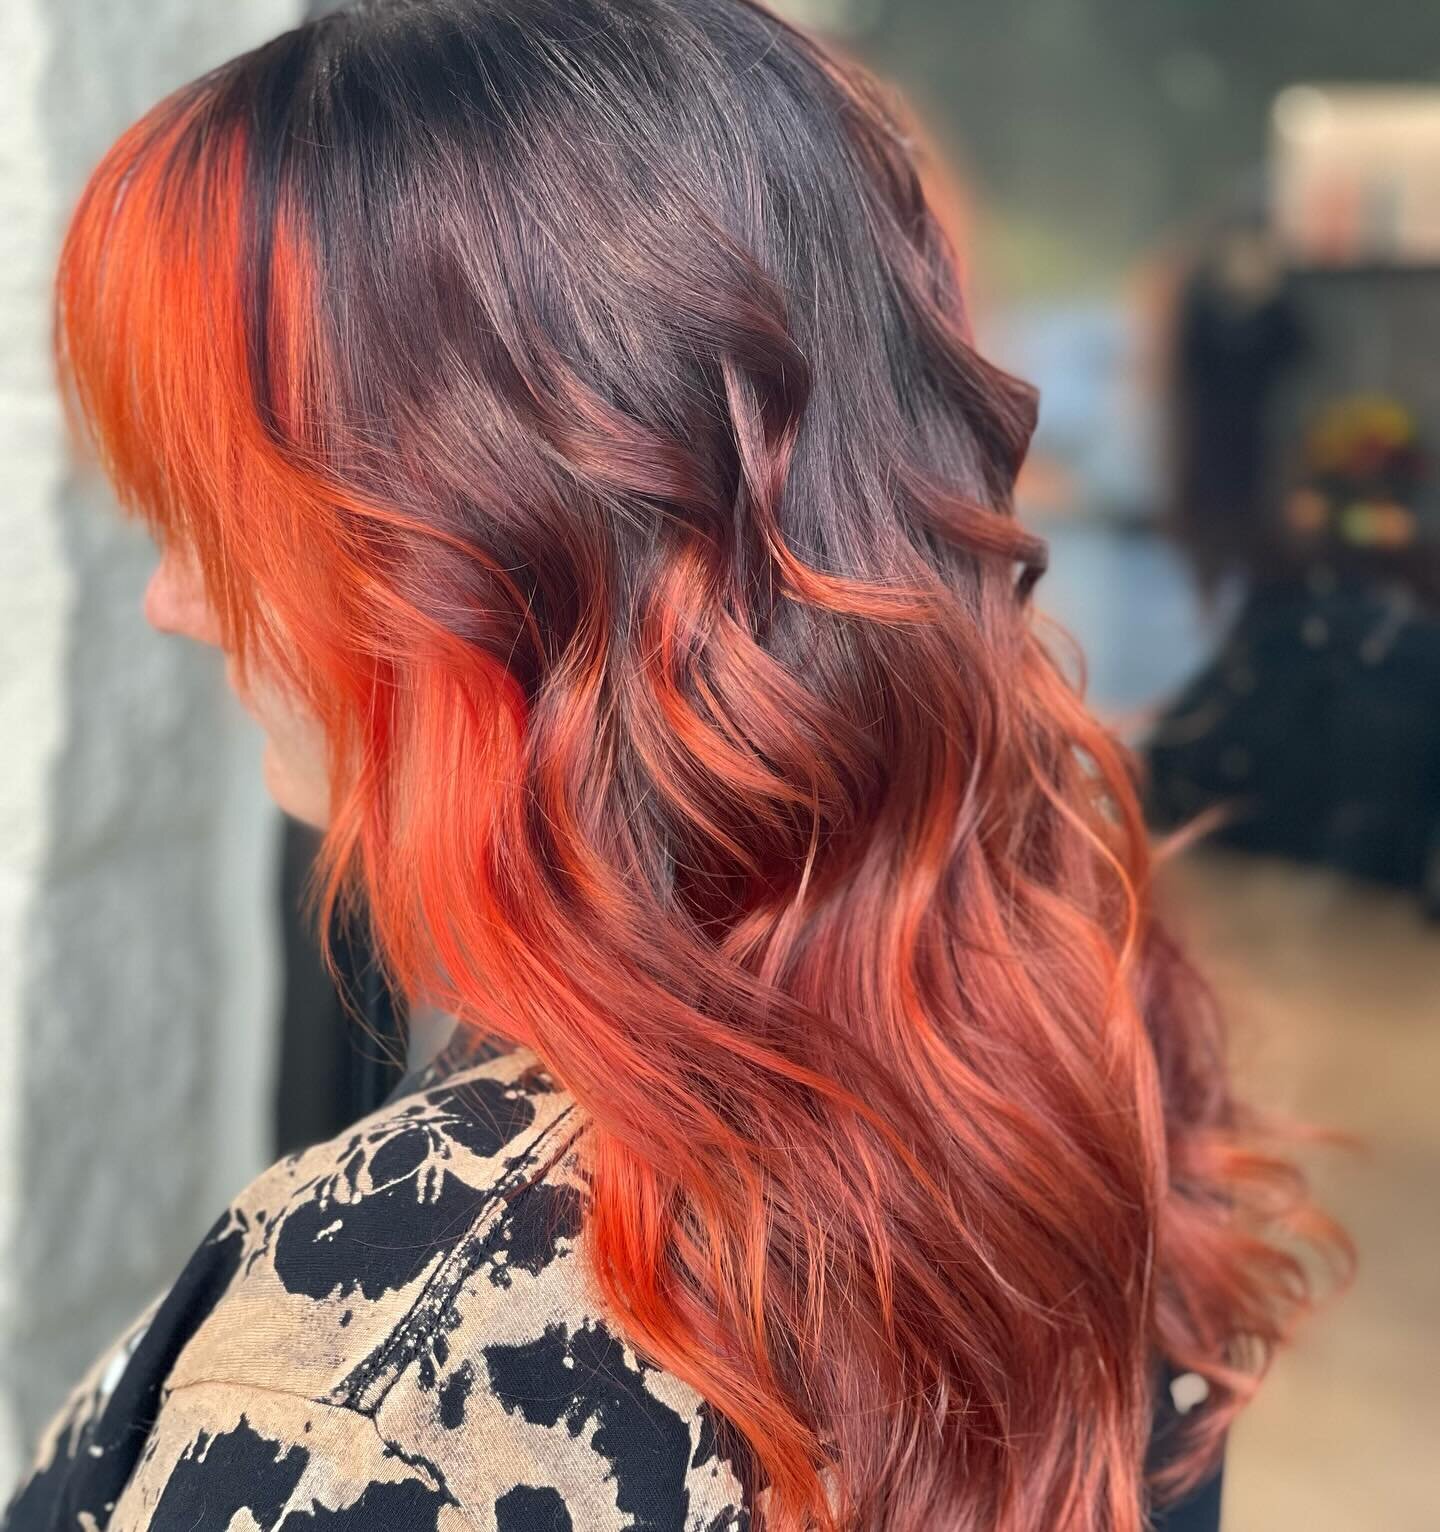 Embracing the cozy vibes of fall with a fresh twist 🍊🍁 Loving @seyonanaj new orange fall hair, it&rsquo;s like autumn leaves on her head! 🍂💁&zwj;♀️ #FallHair #OrangeHair #AutumnVibes #NewLook #wemakeitvivid #linthicummd @wemakeitvivid